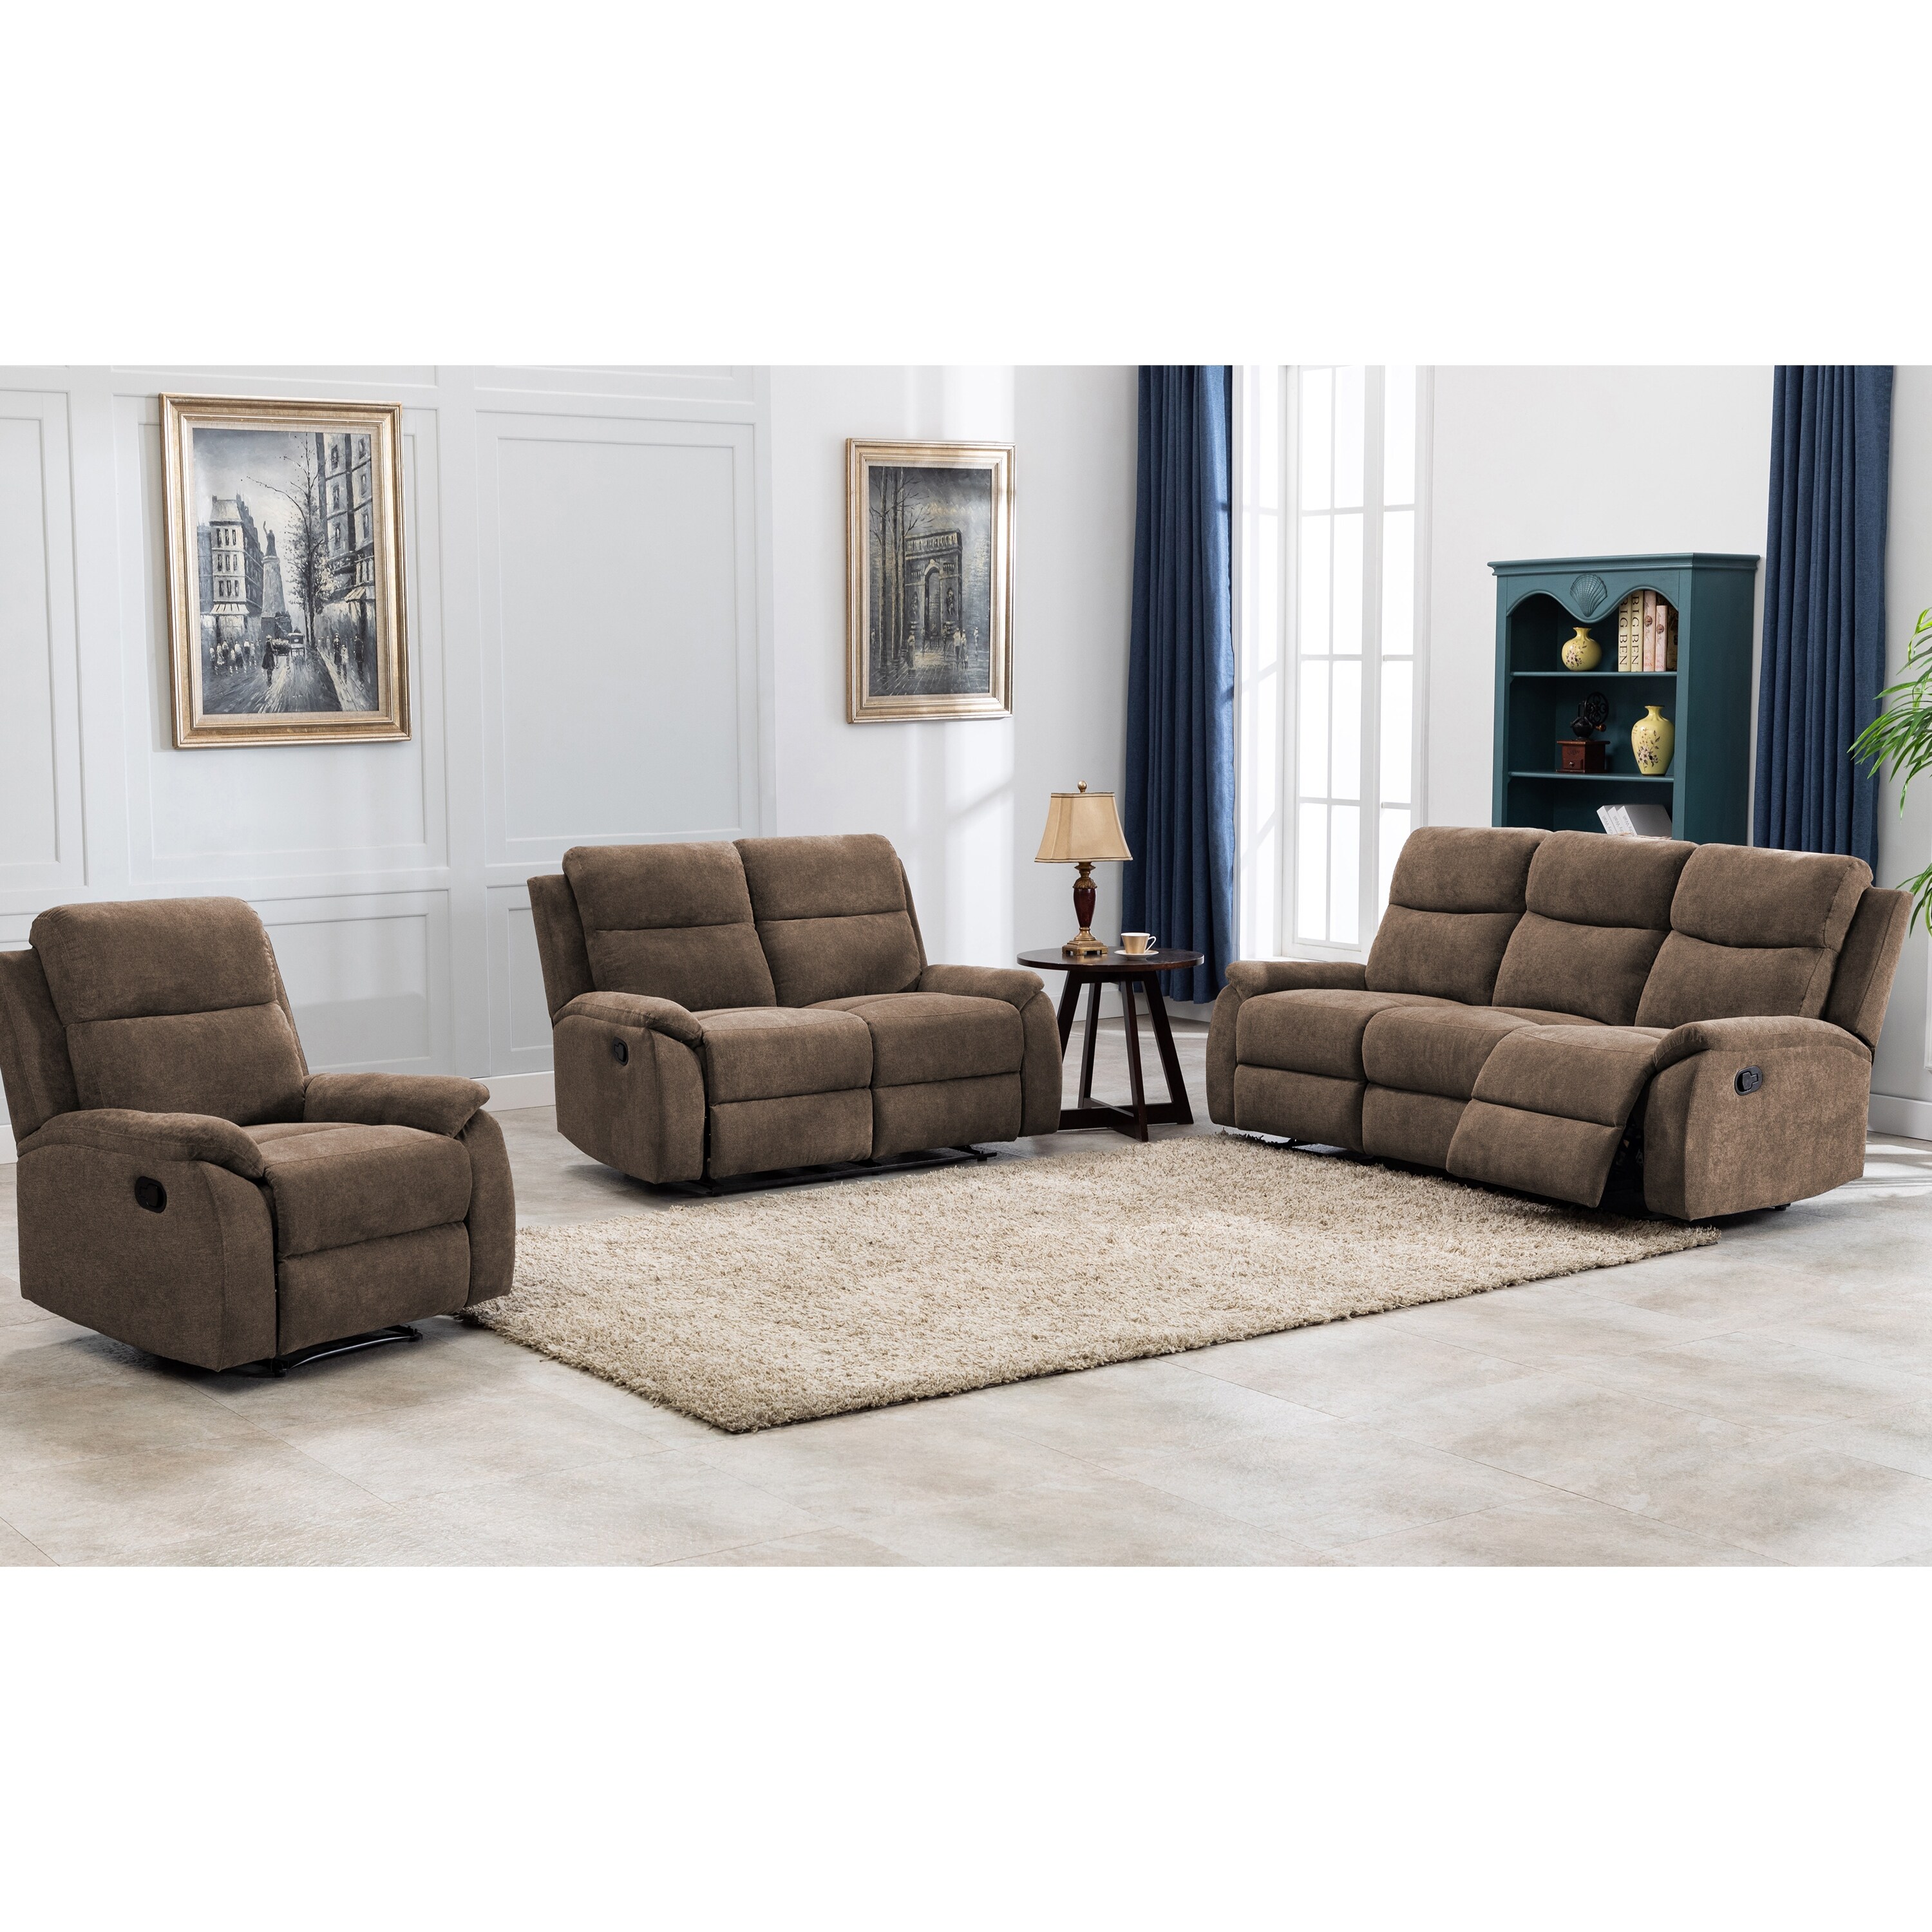 Recliners Living Room Sets - Bed Bath & Beyond